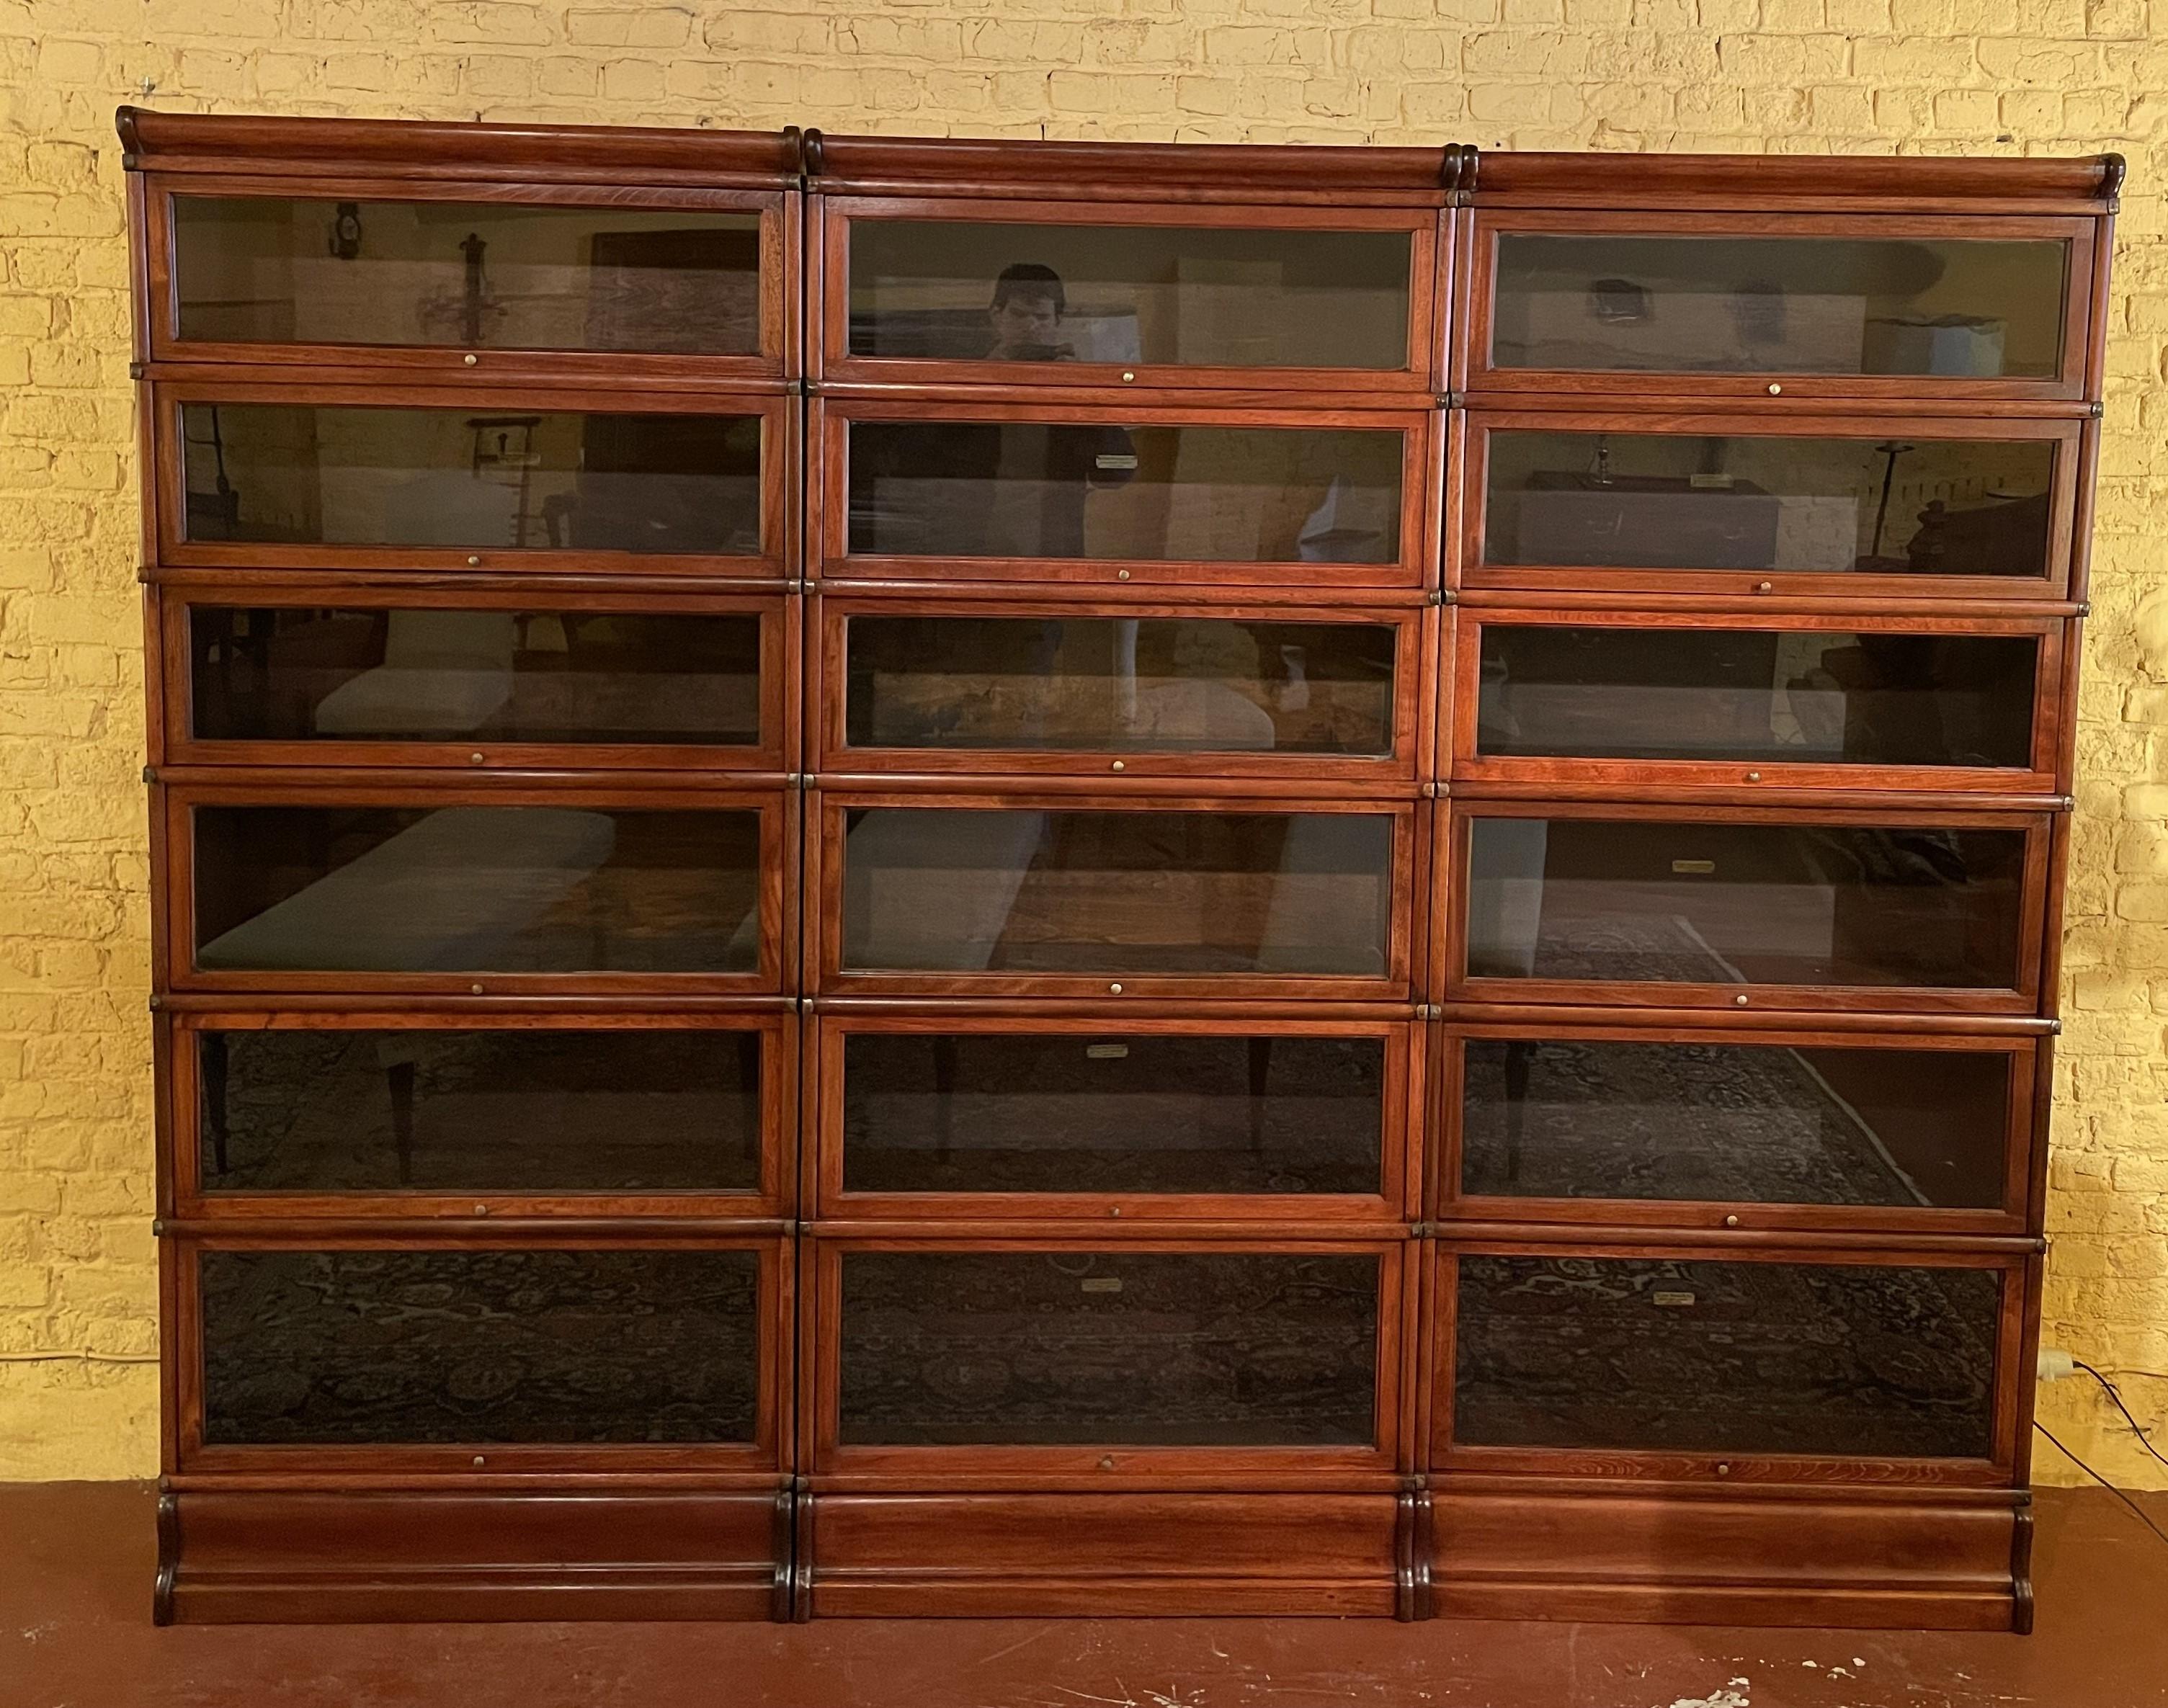 Elegant set of three large Globe Wernicke London mahogany bookcases from the end of the 19th century - Early 20th century from England

The three bookcases are made up of 6 elements. It is rare to find such a beautiful set that looks stunning when